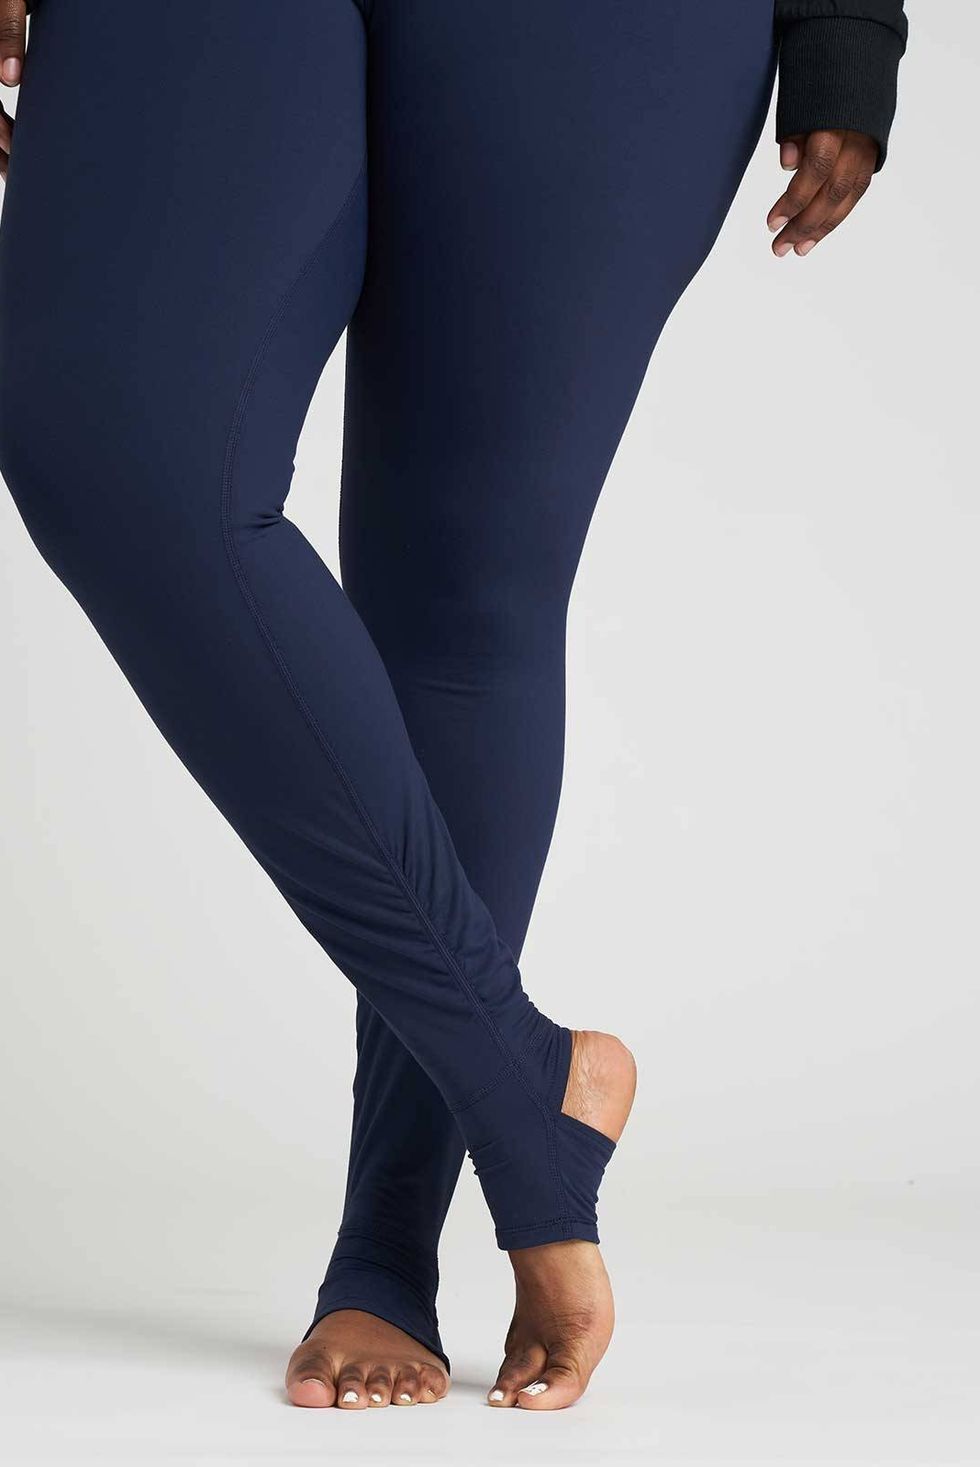 Found It! Workout Leggings for Every Shape—and no, They'll Never Fall Down